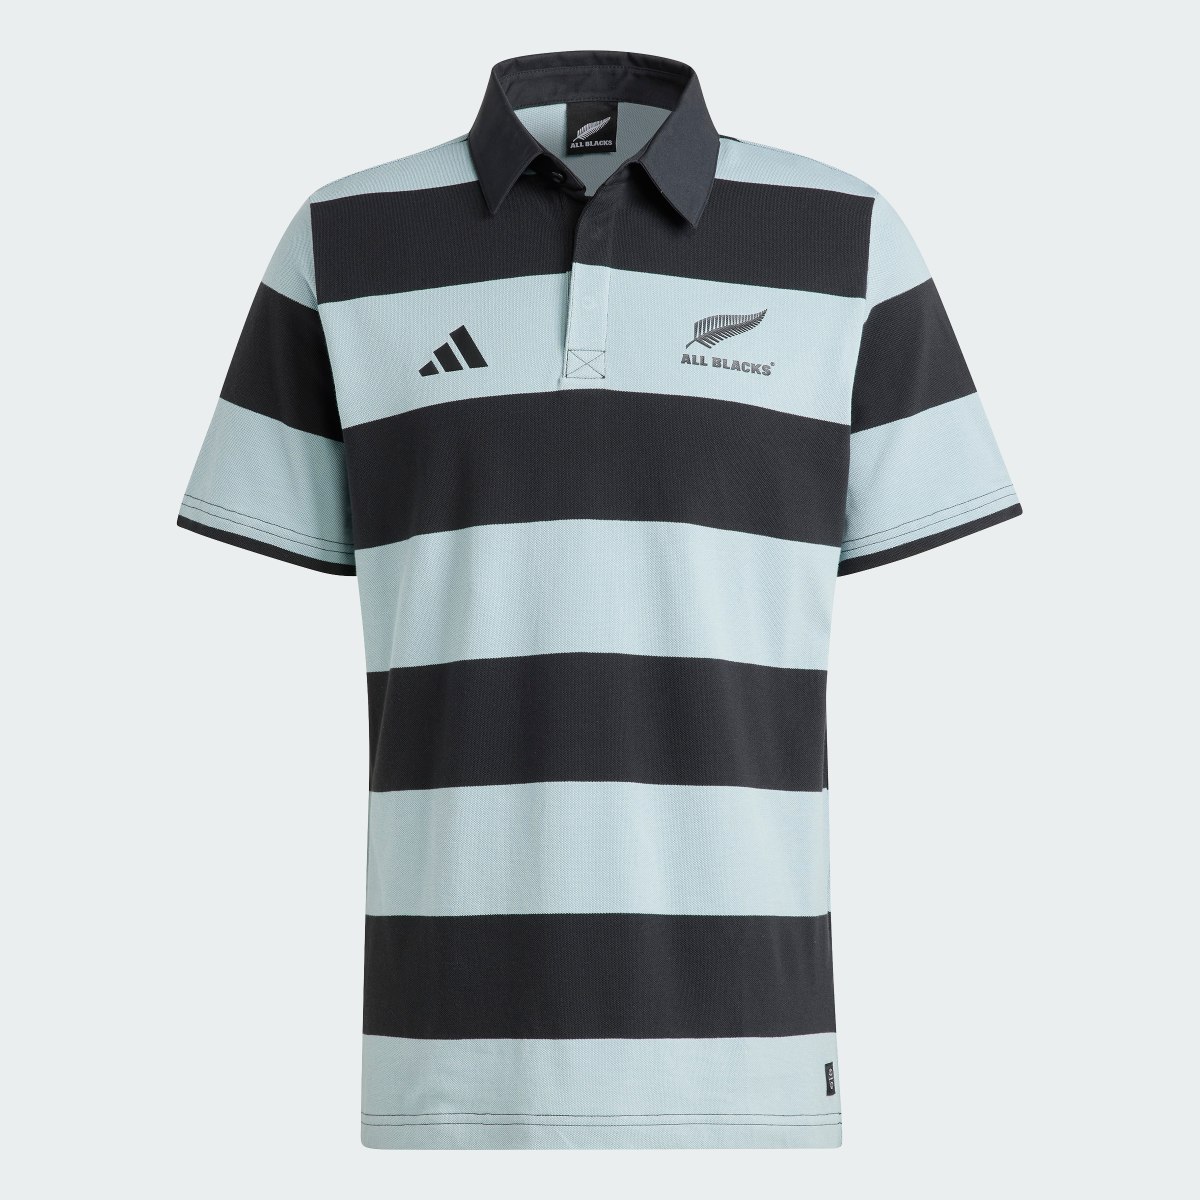 Adidas All Blacks Rugby Supporters Polo Shirt. 5